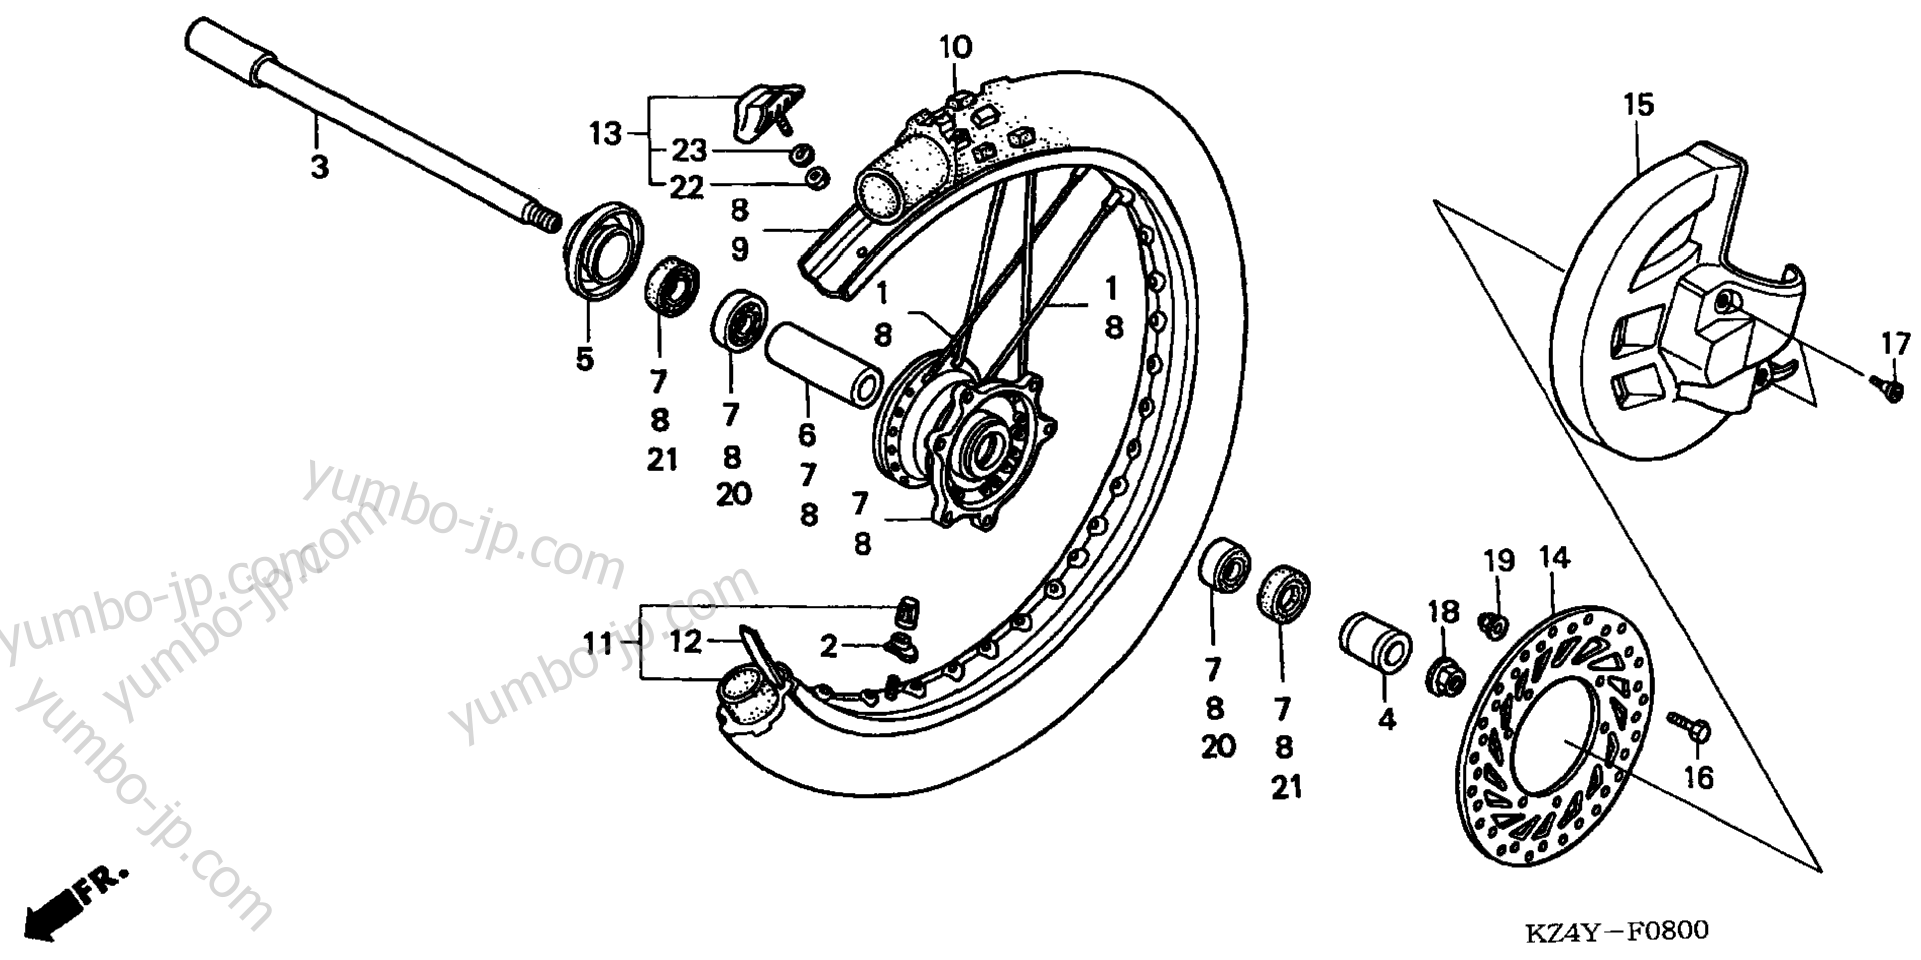 FRONT WHEEL for motorcycles HONDA CR125R A 2000 year